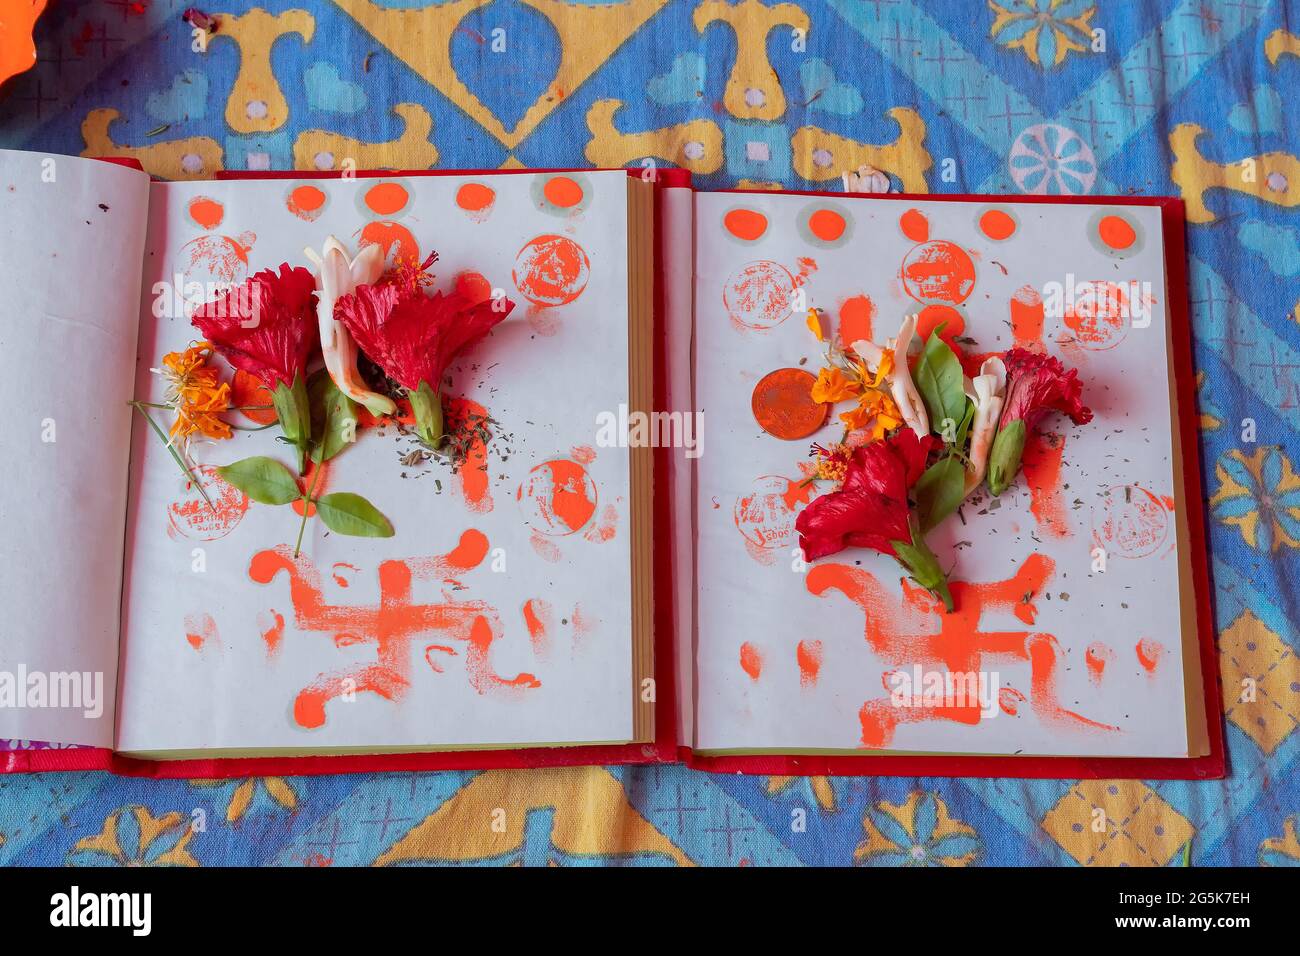 Kolkata,West Bengal,India - 15th April 2019 : New accounts book opened to start writing in Bengali new year, are being worshipped , called nabobarsho. Stock Photo